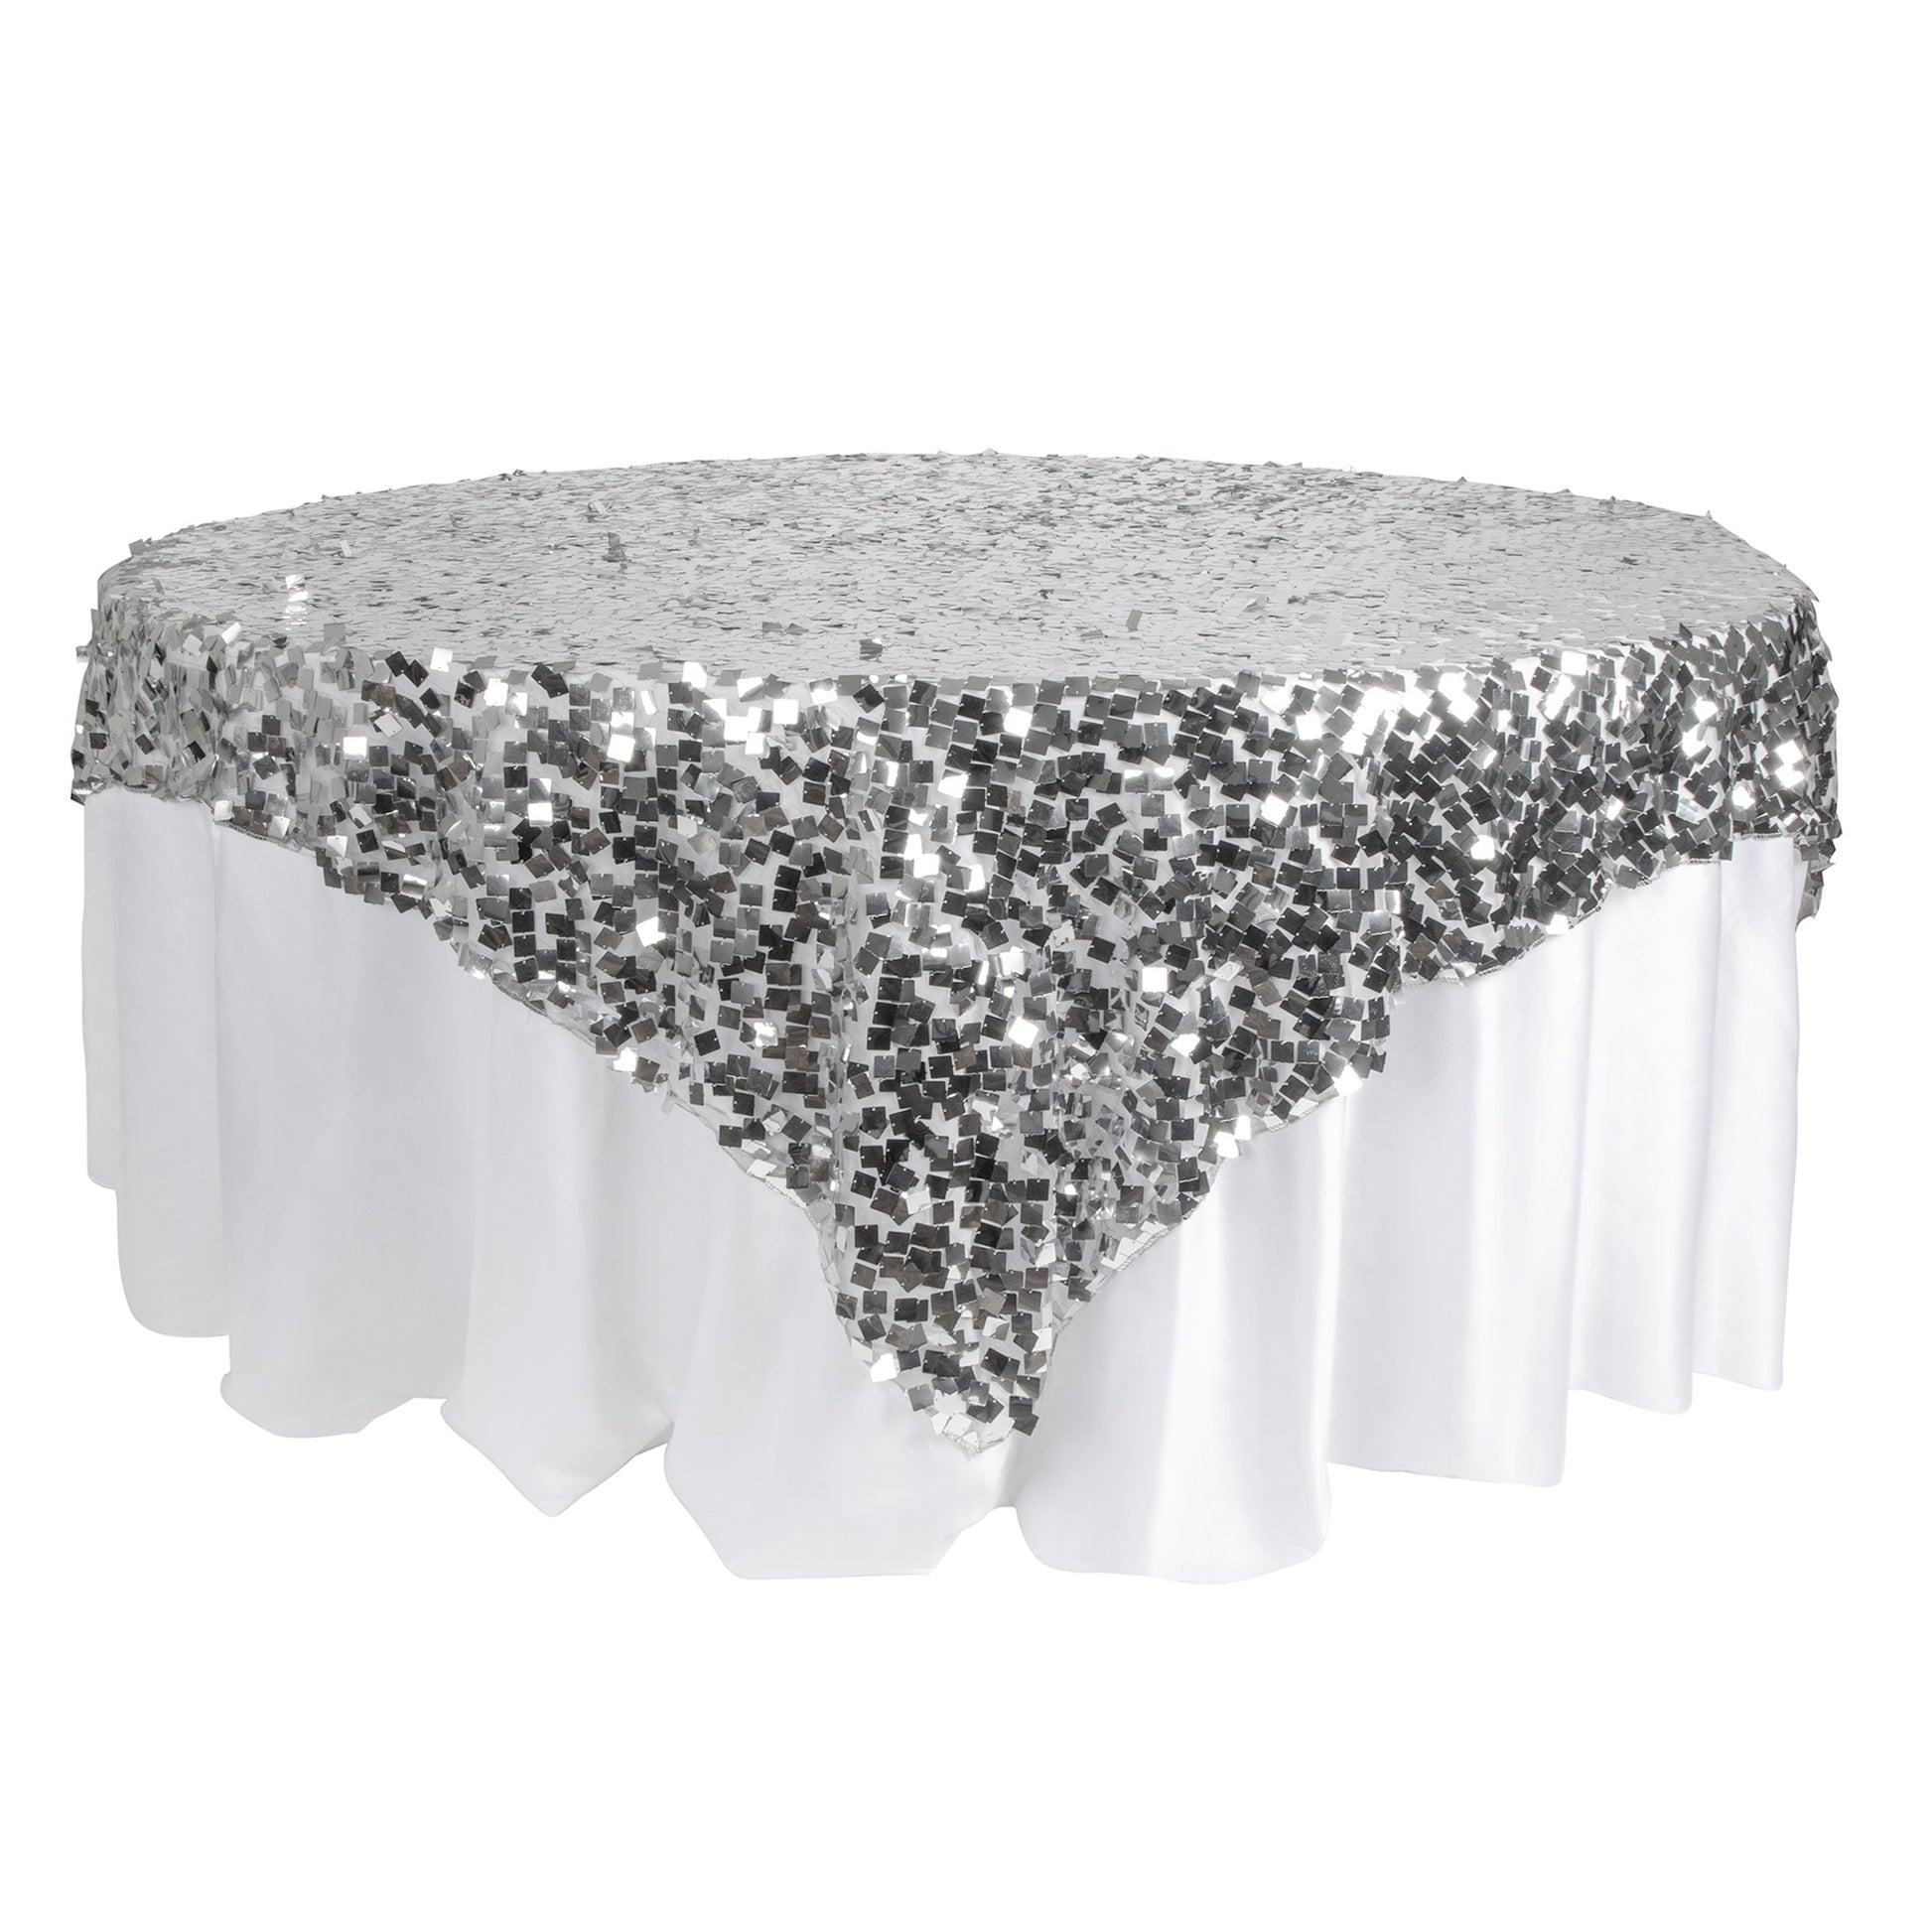 Square Payette Sequin Table Overlay Topper 90"x90" Square - Silver